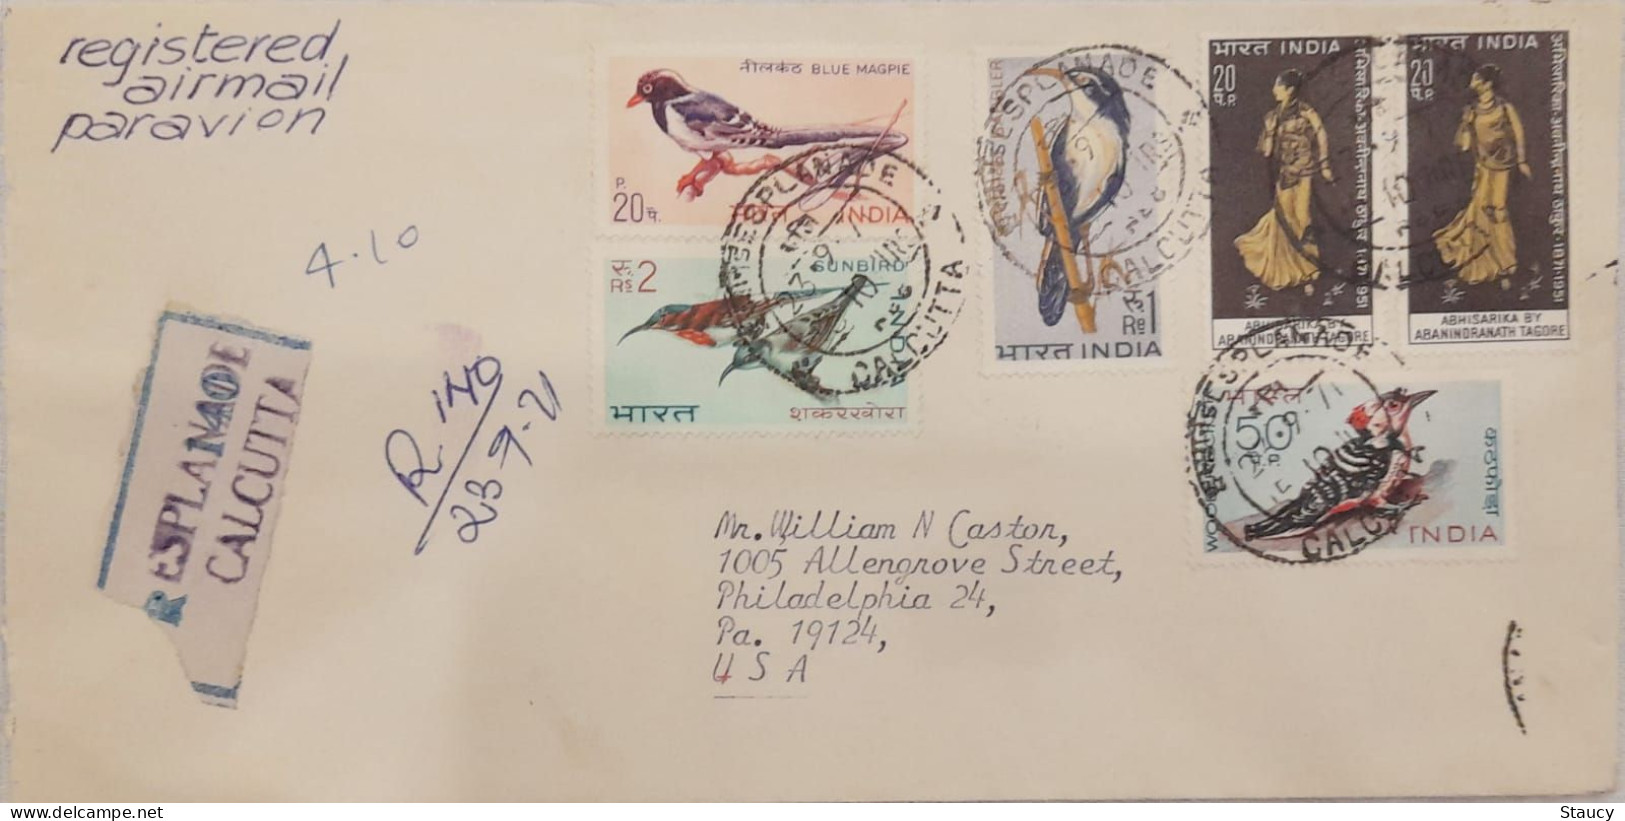 India 1968 BIRDS~Wildlife Preservation - Fauna / Birds Complete Set Of 4 Stamps USED On Registered Cover To USA As Scan - Corréo Aéreo